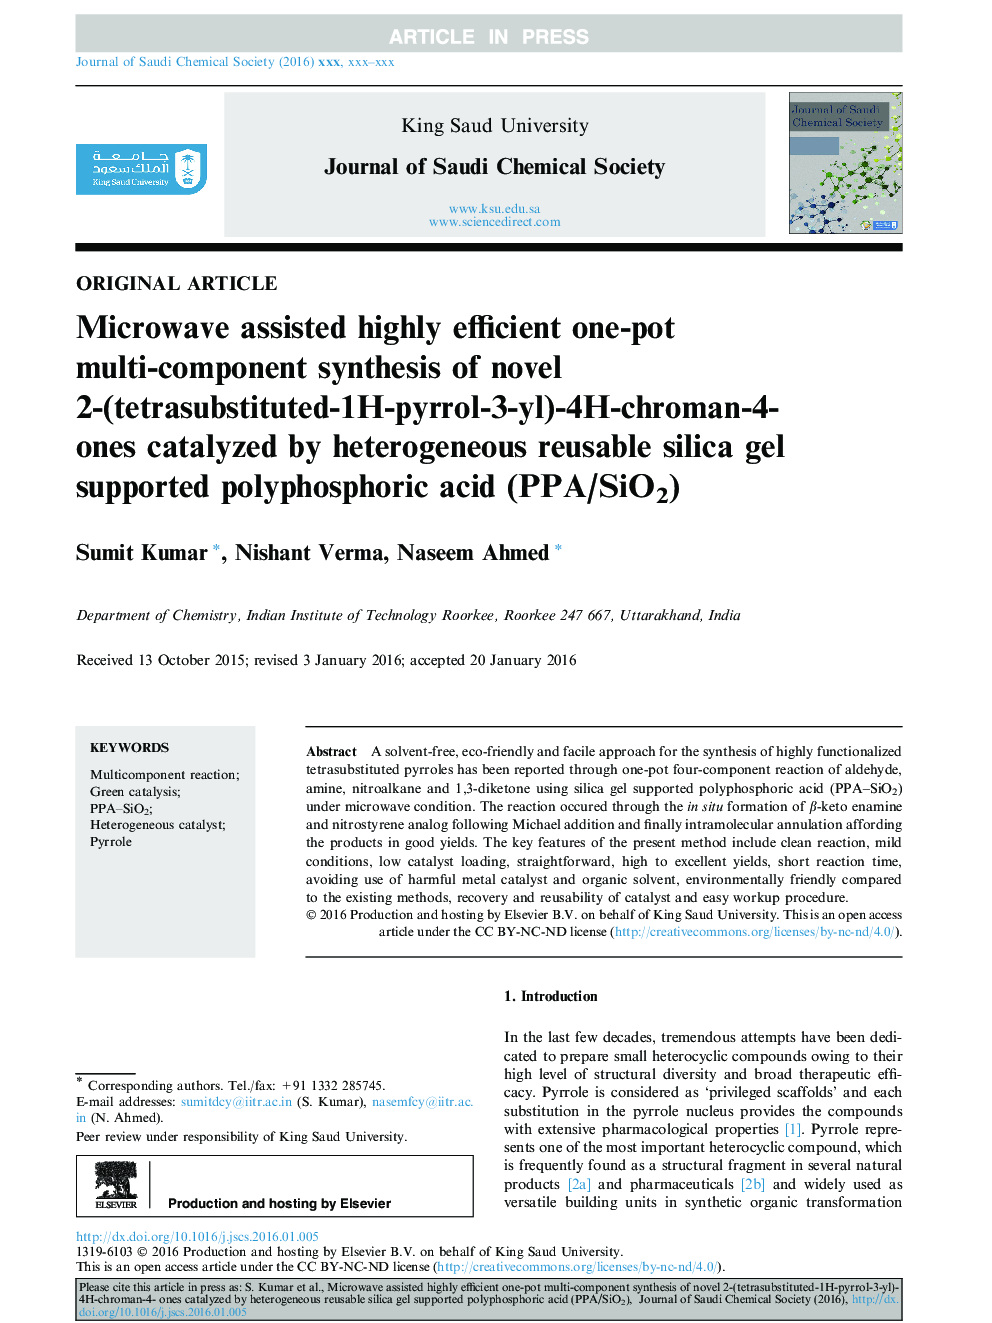 Microwave assisted highly efficient one-pot multi-component synthesis of novel 2-(tetrasubstituted-1H-pyrrol-3-yl)-4H-chroman-4-ones catalyzed by heterogeneous reusable silica gel supported polyphosphoric acid (PPA/SiO2)